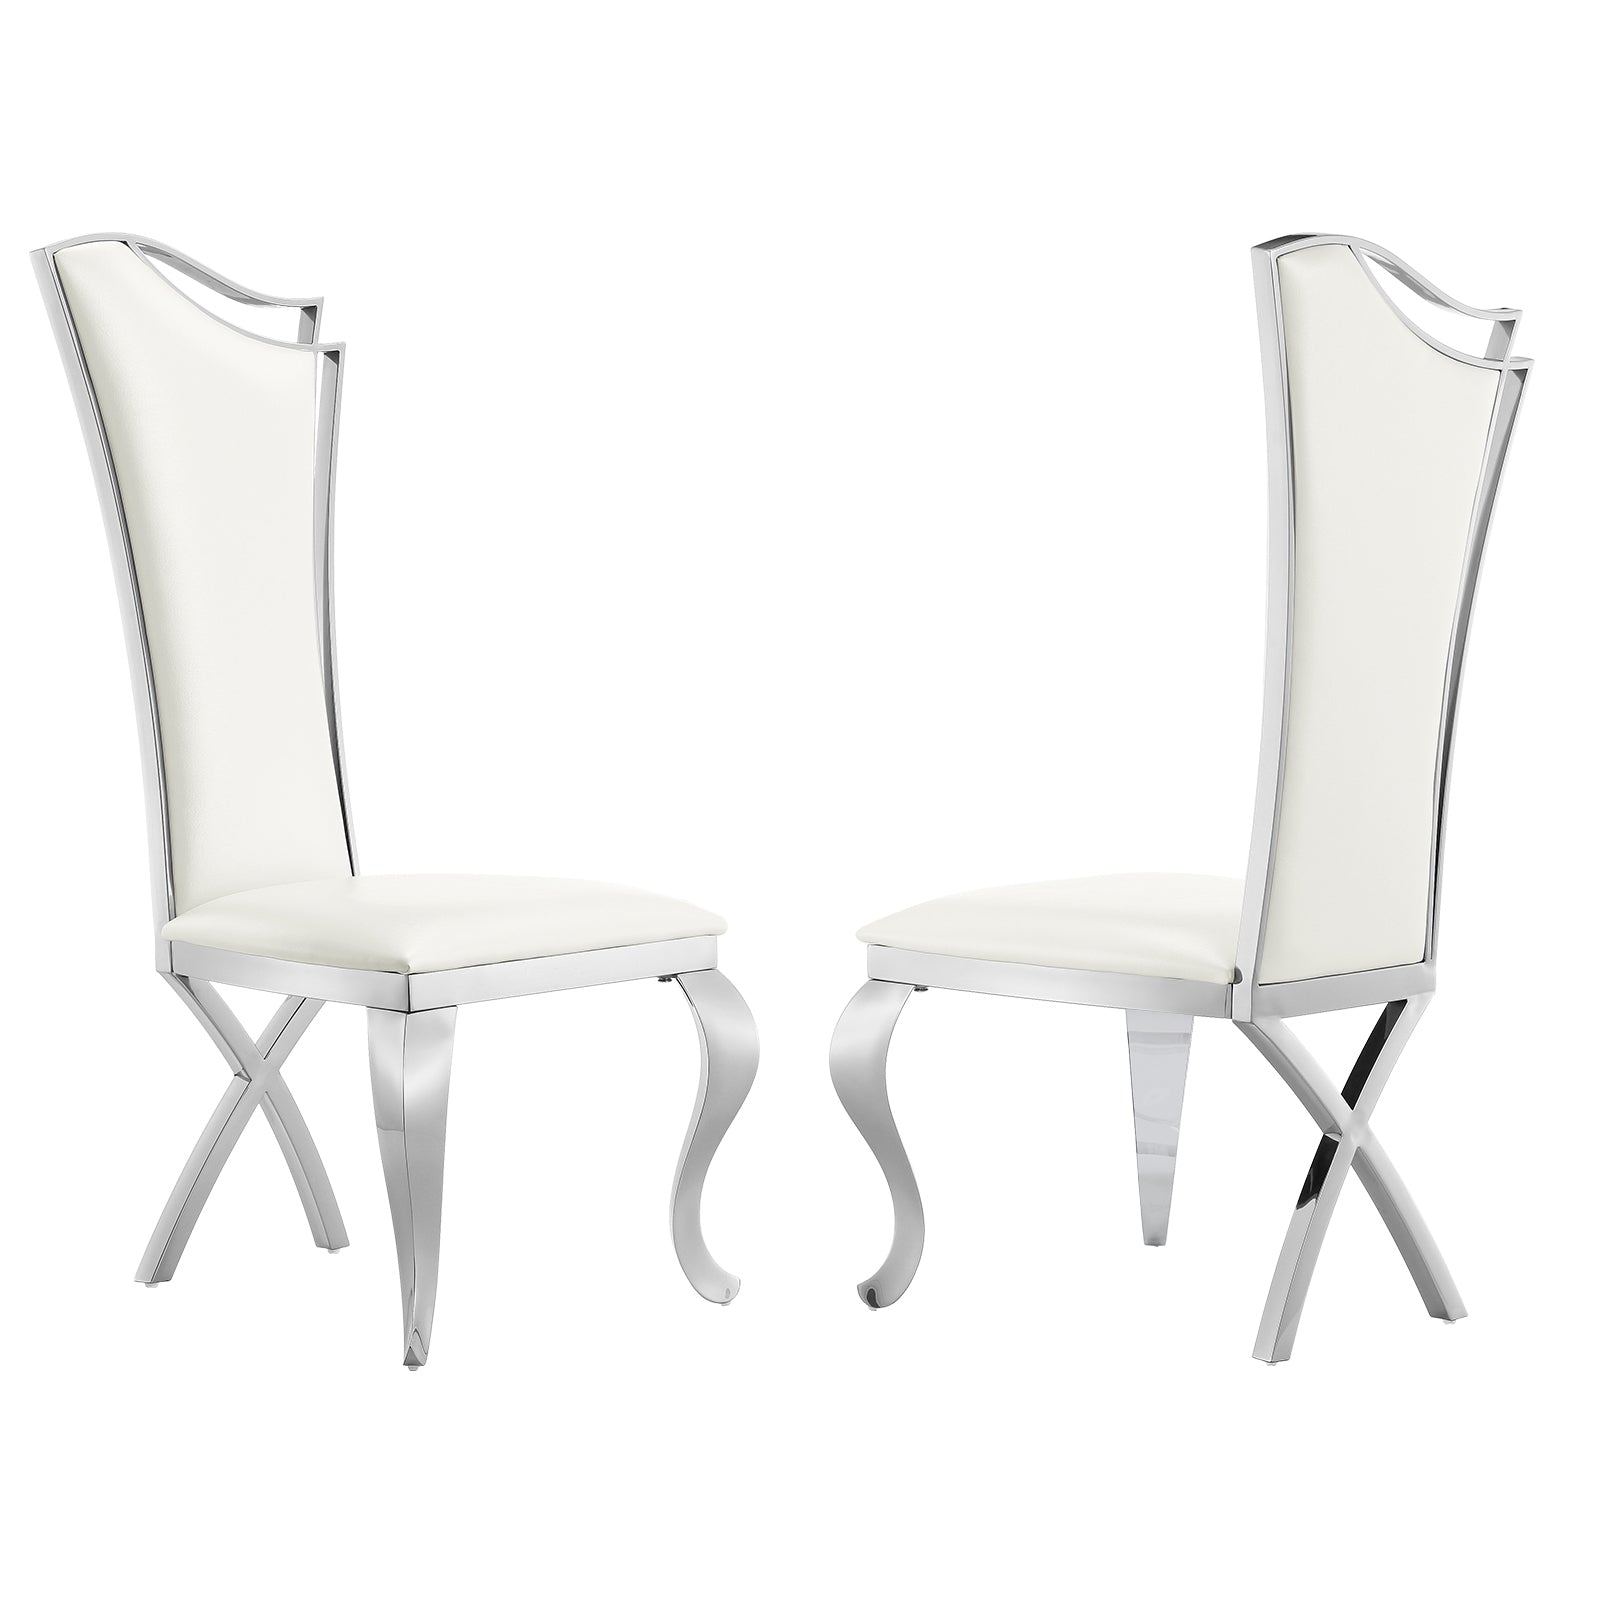 Elevate Your Dining Experience with White Leather Upholstered Dining Chairs and Silver Metal Legs